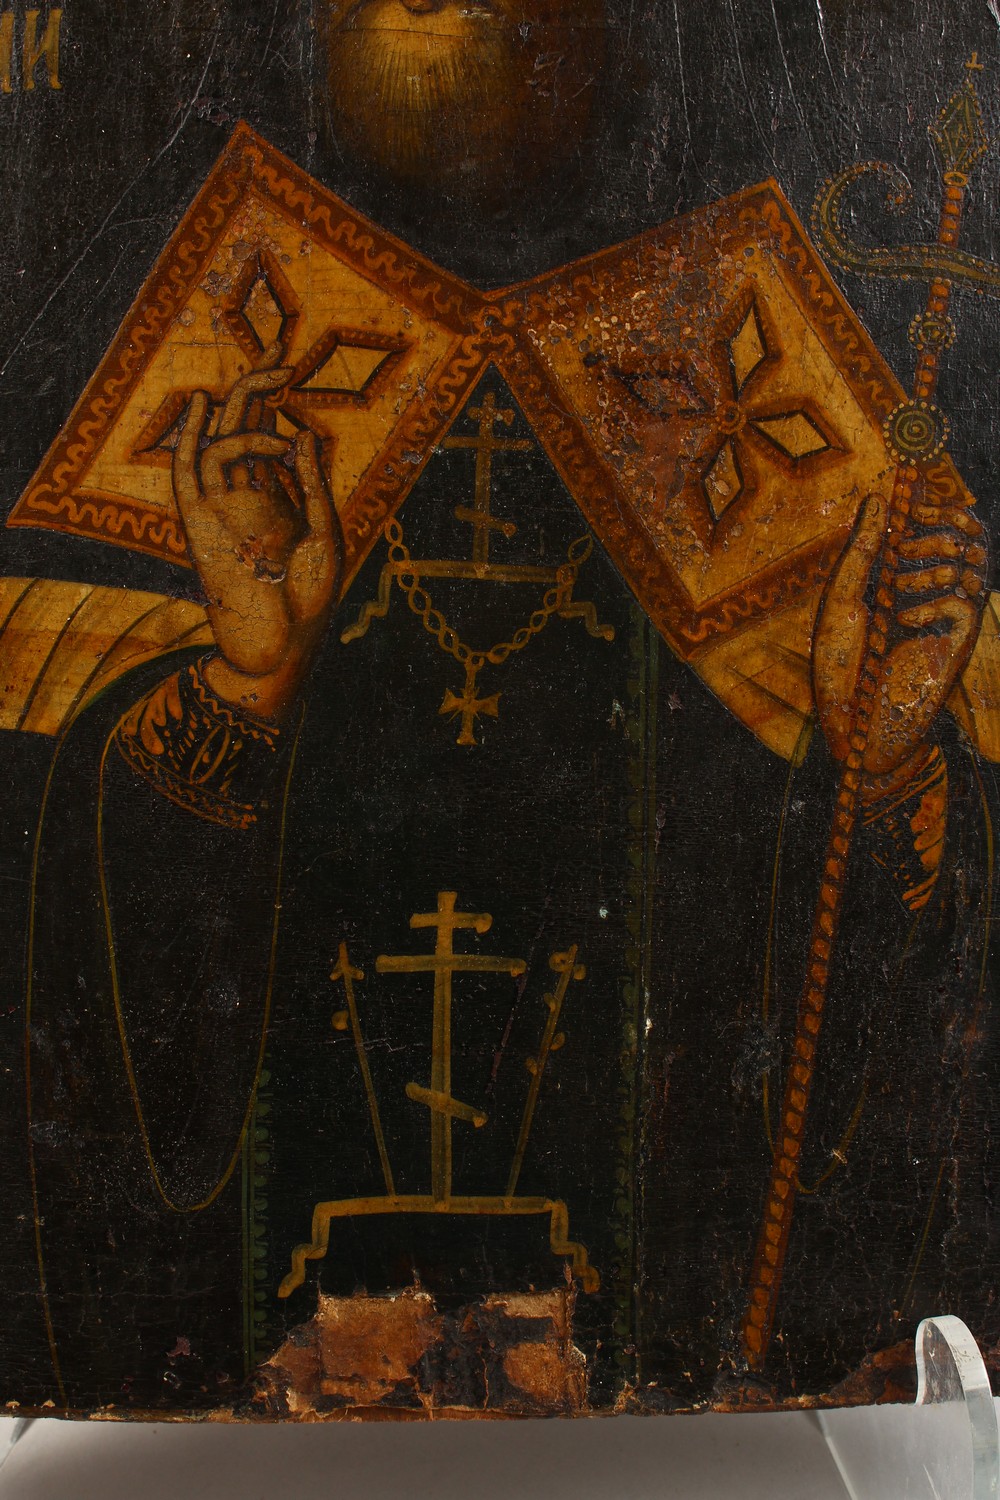 A RUSSIAN ICON. SAINT MITROFAN OF VORONEZH (1623-1703), on wood. See label on reverse. 15.5ins x - Image 5 of 10